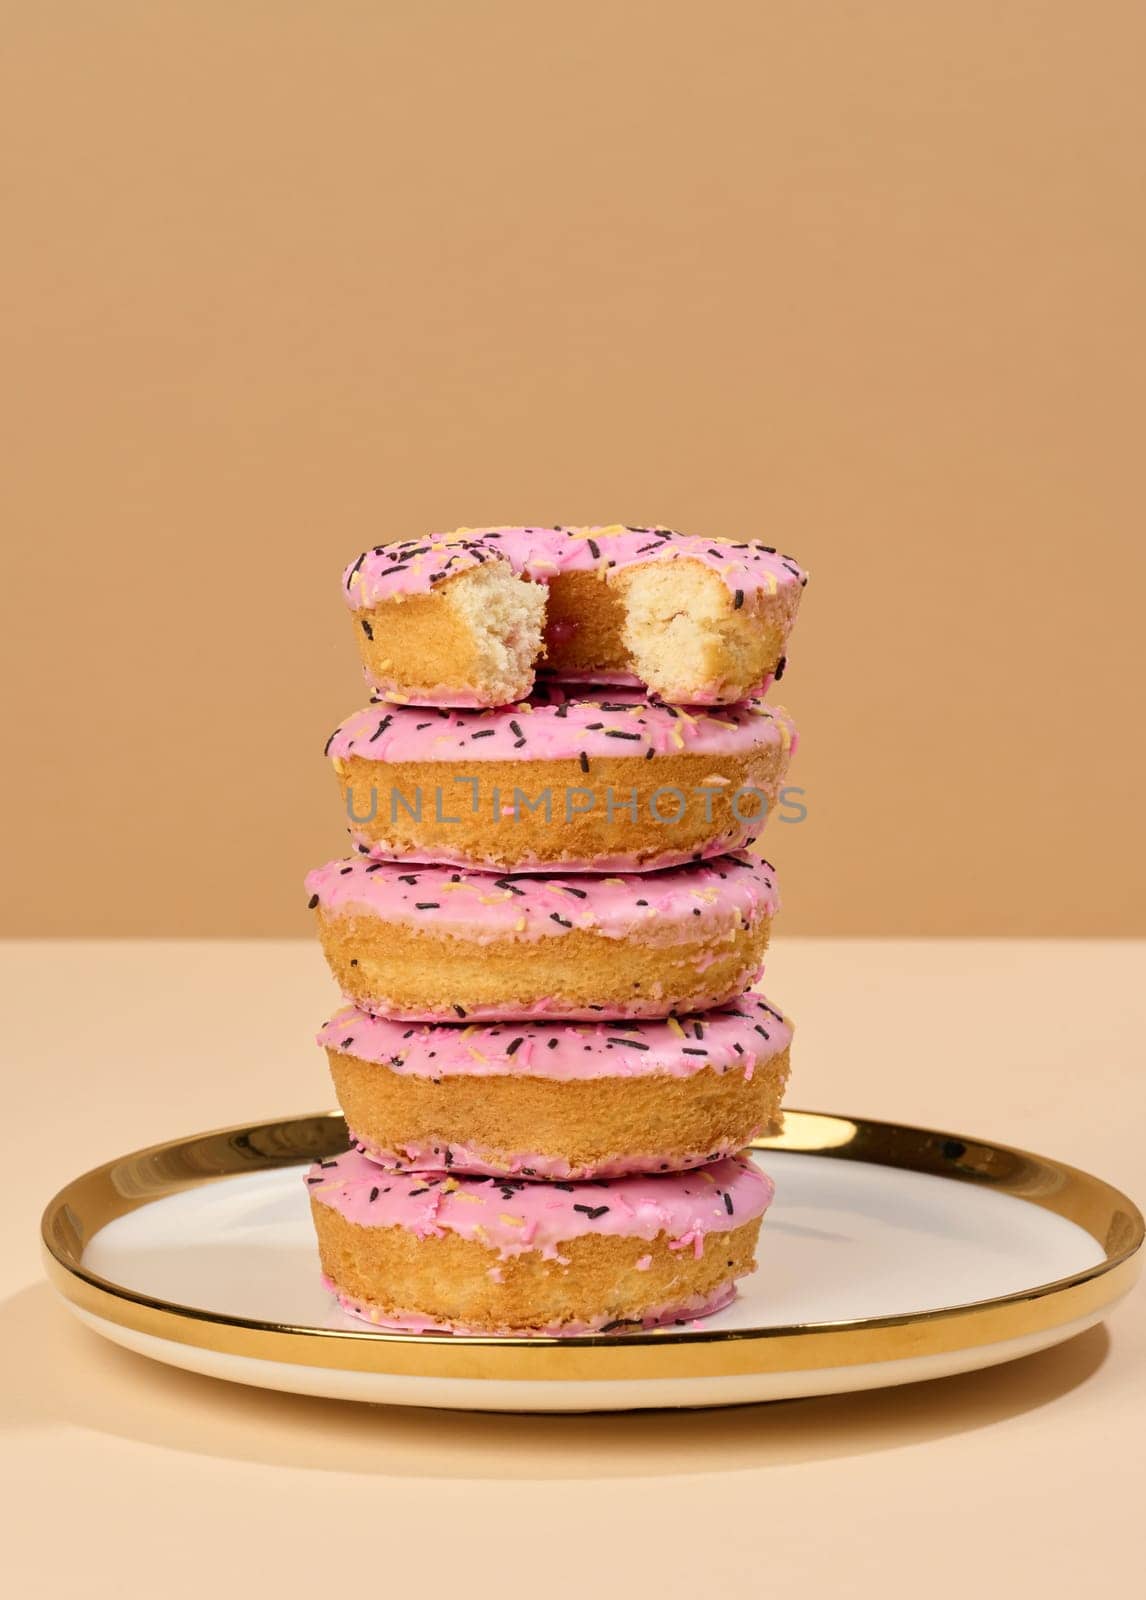 Donut covered with pink glaze and sprinkled with colorful sprinkles on a round plate, brown background